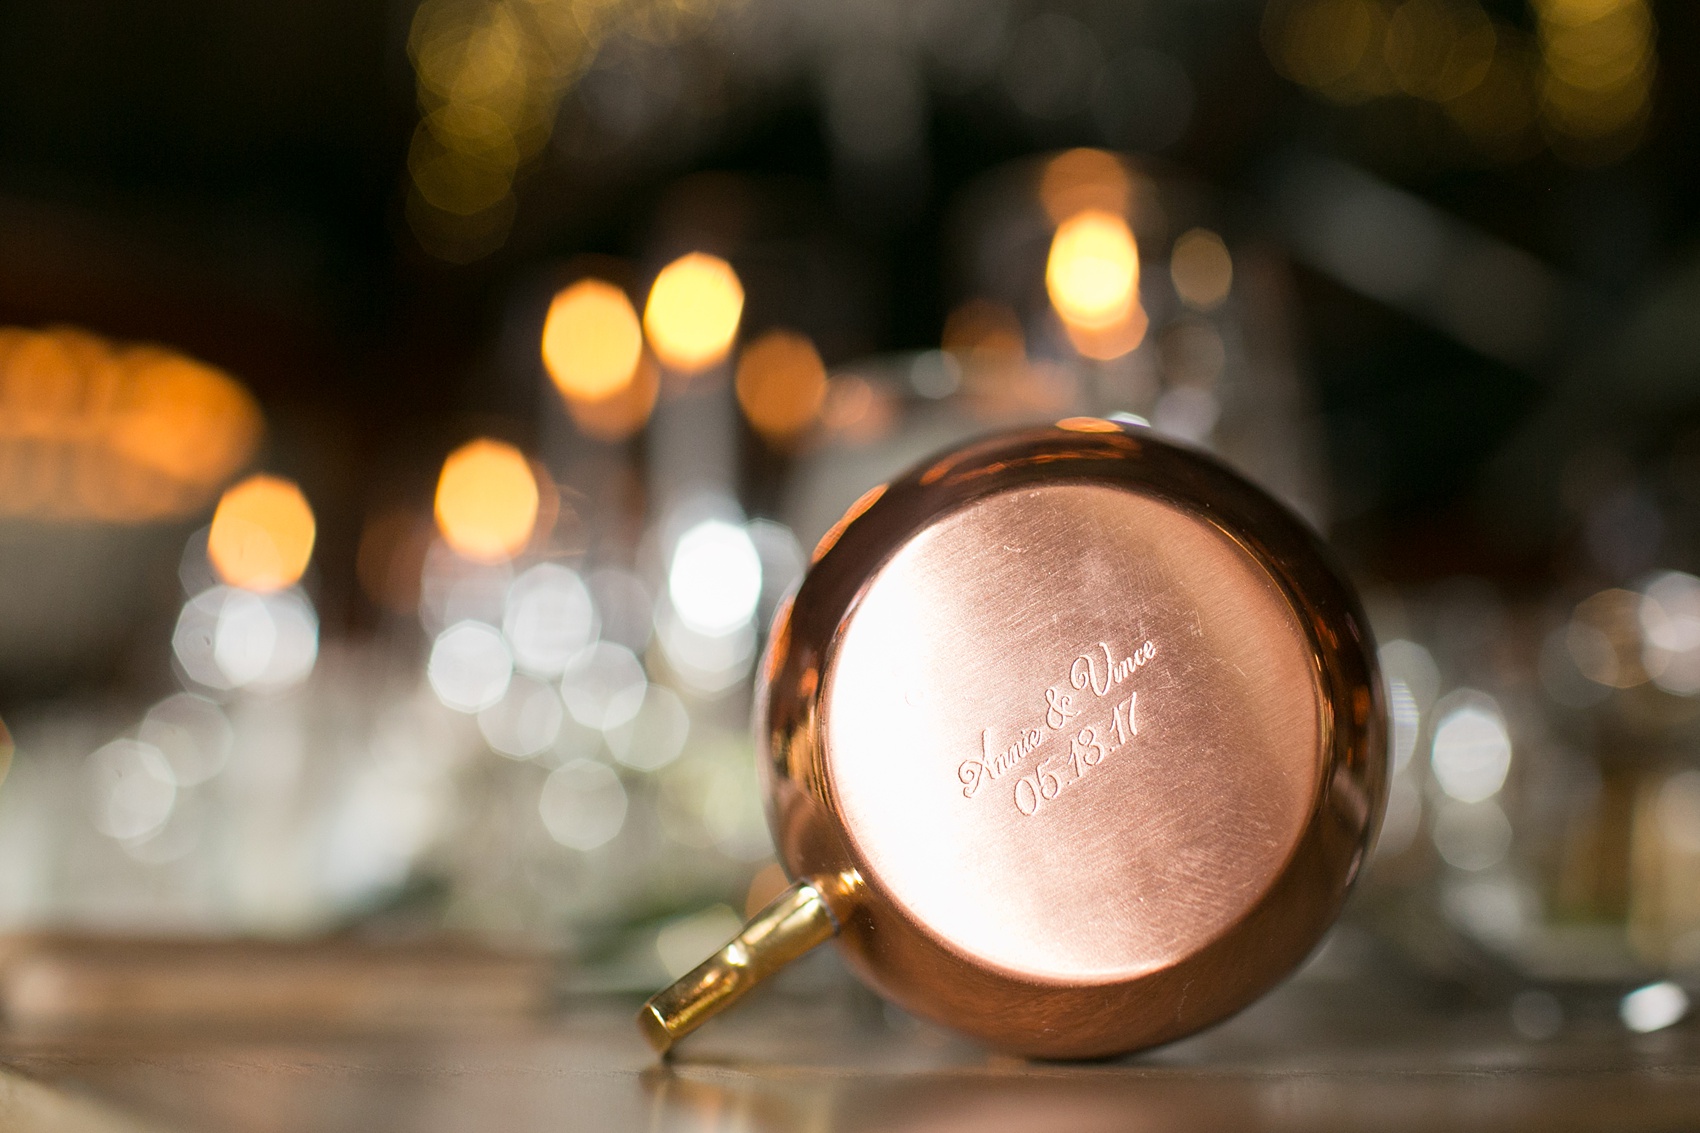 Pavilion at Angus Barn wedding photos by Mikkel Paige Photography. Picture of the engraving detail on the custom copper mug guest favors.